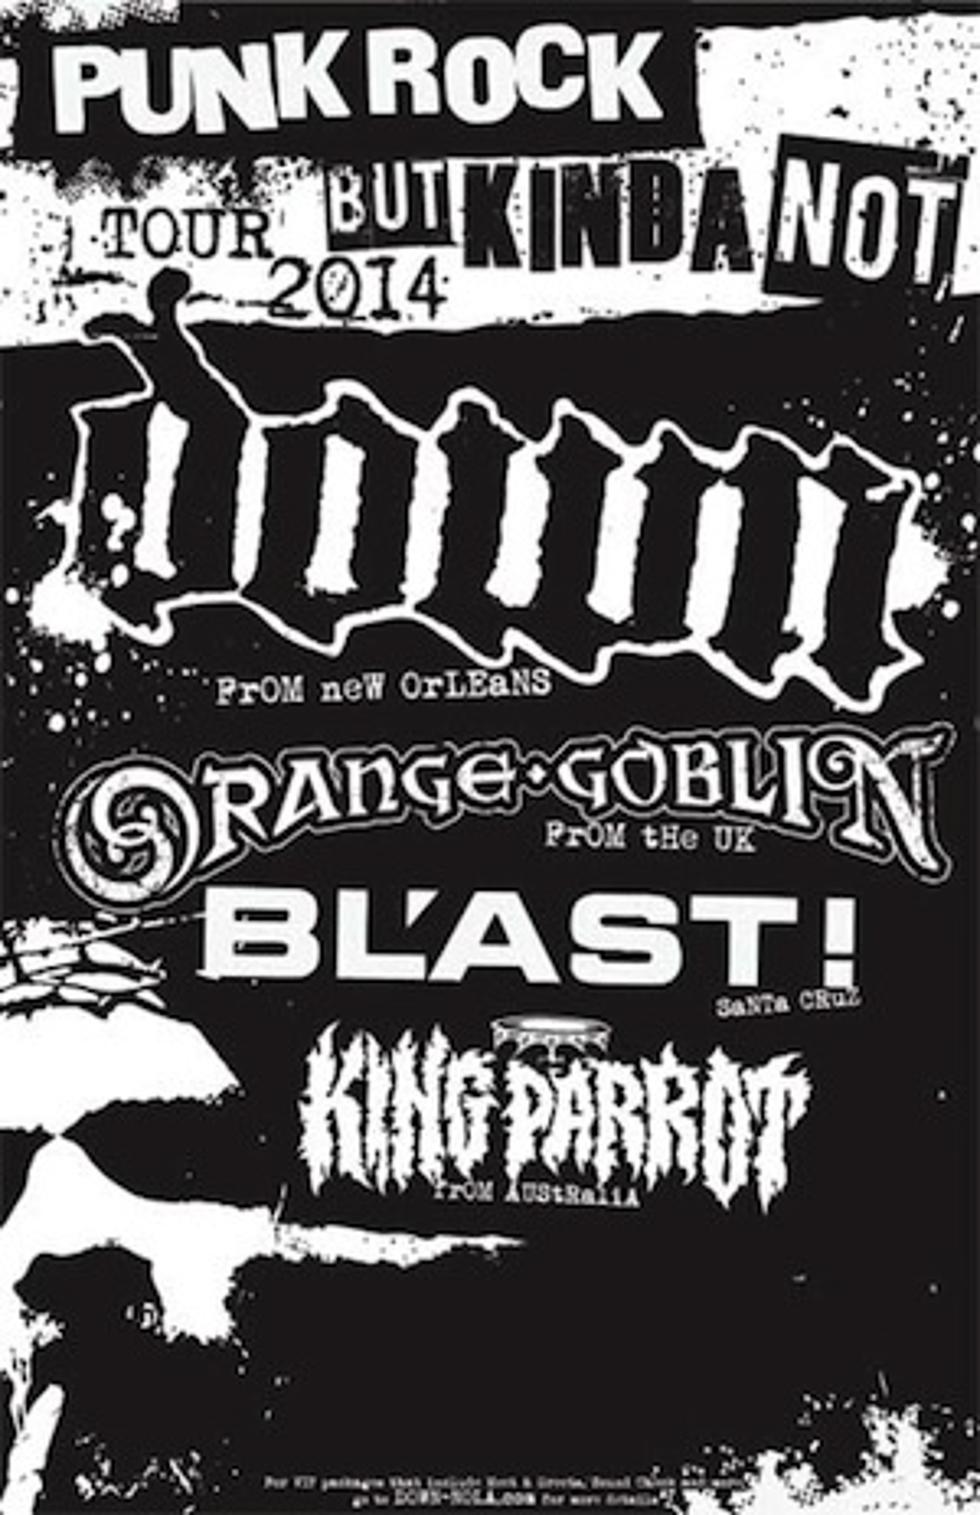 Down Book December 2014 Dates With Orange Goblin, BL&#8217;AST + King Parrot